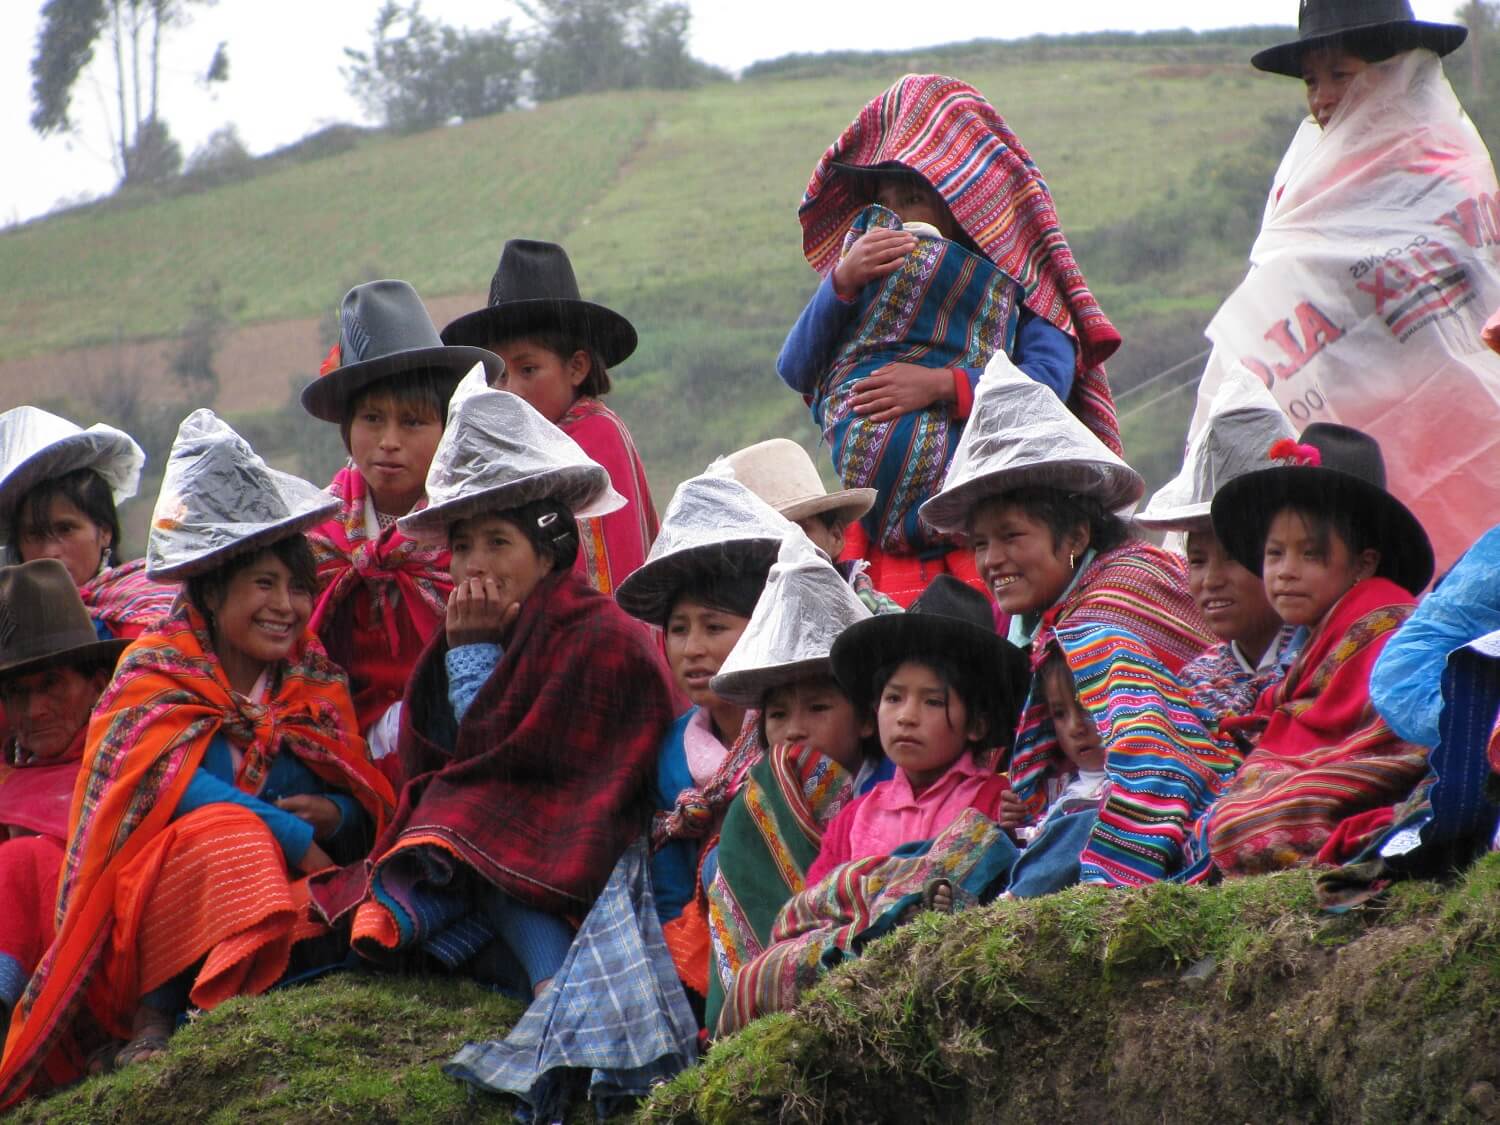 Local women and children protect themselves from the rain by putting a plastic bag on their hats and colorful ponchos around their shoulders. Community-based tourism in Peru - RESPONSible Travel Peru